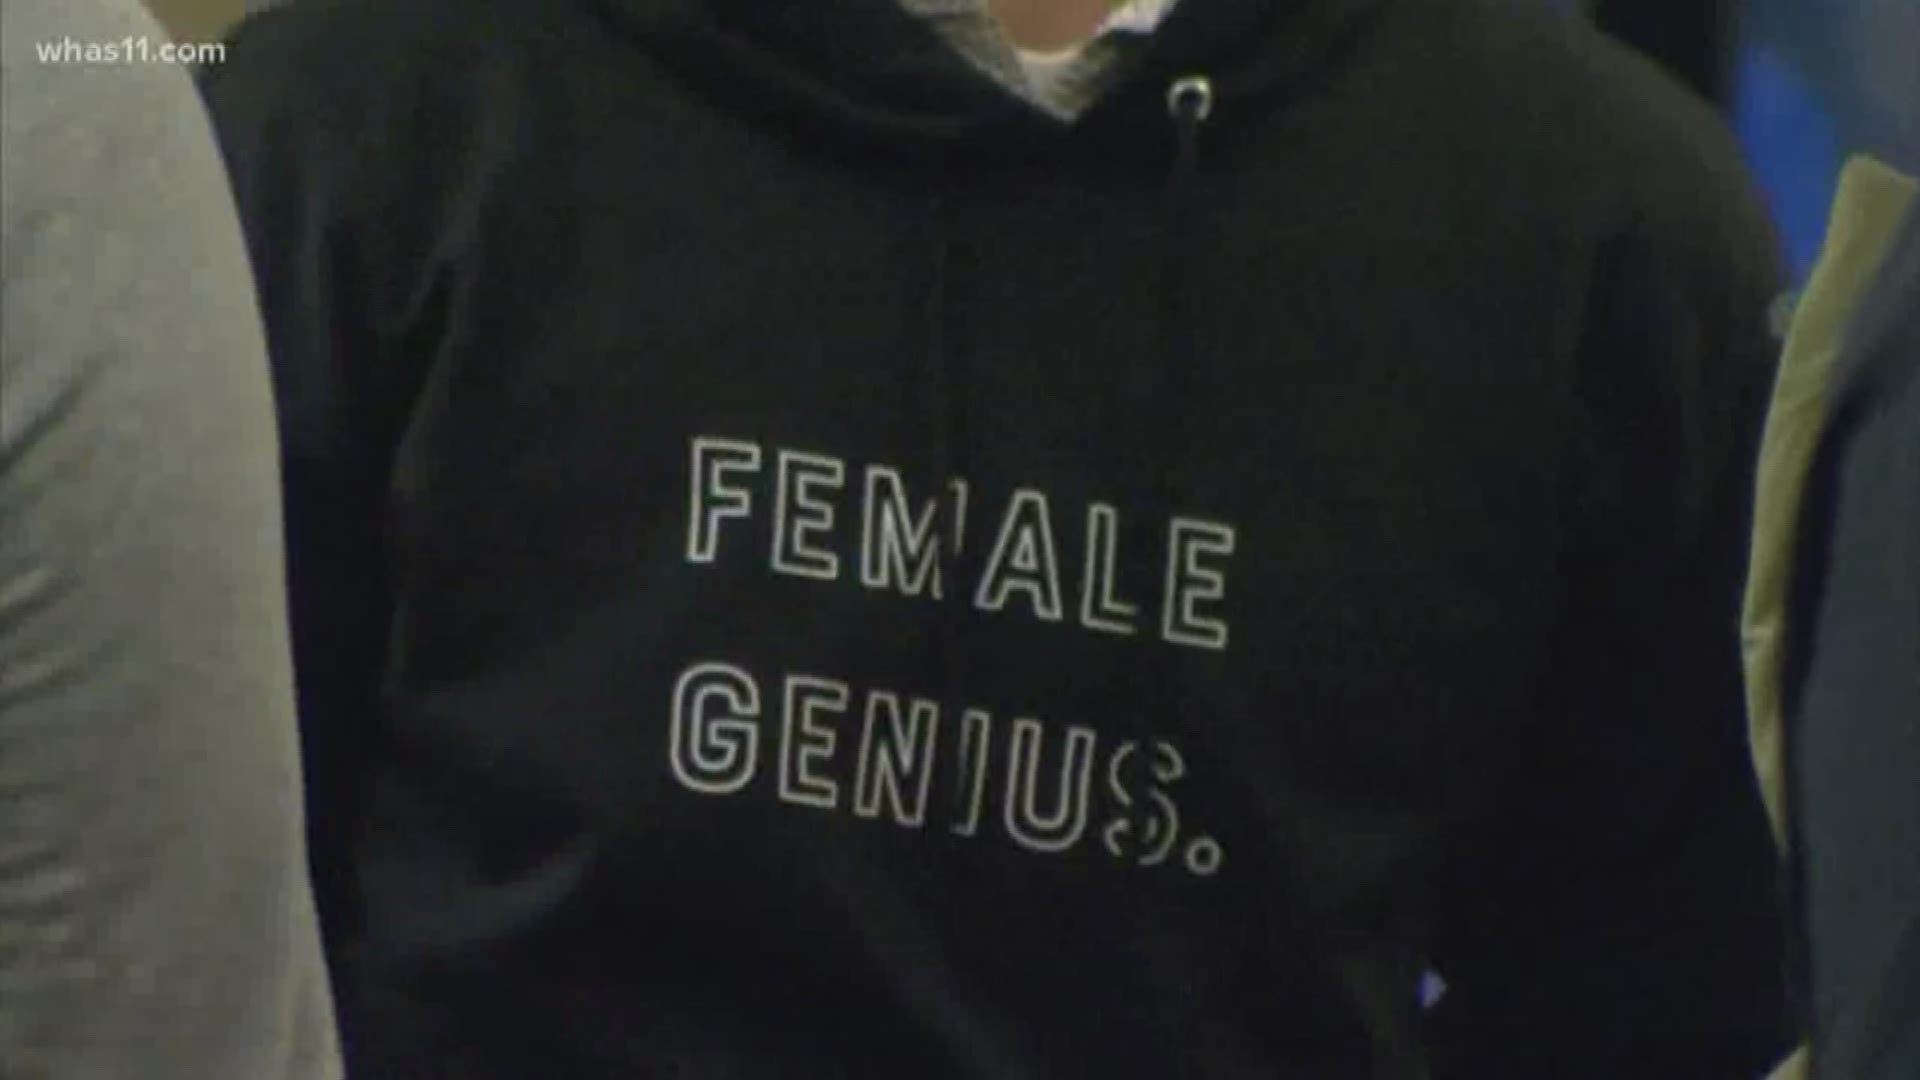 The Women in Business student group sold sweatshirts that say "Female Genius" and "Support Women in Academia."